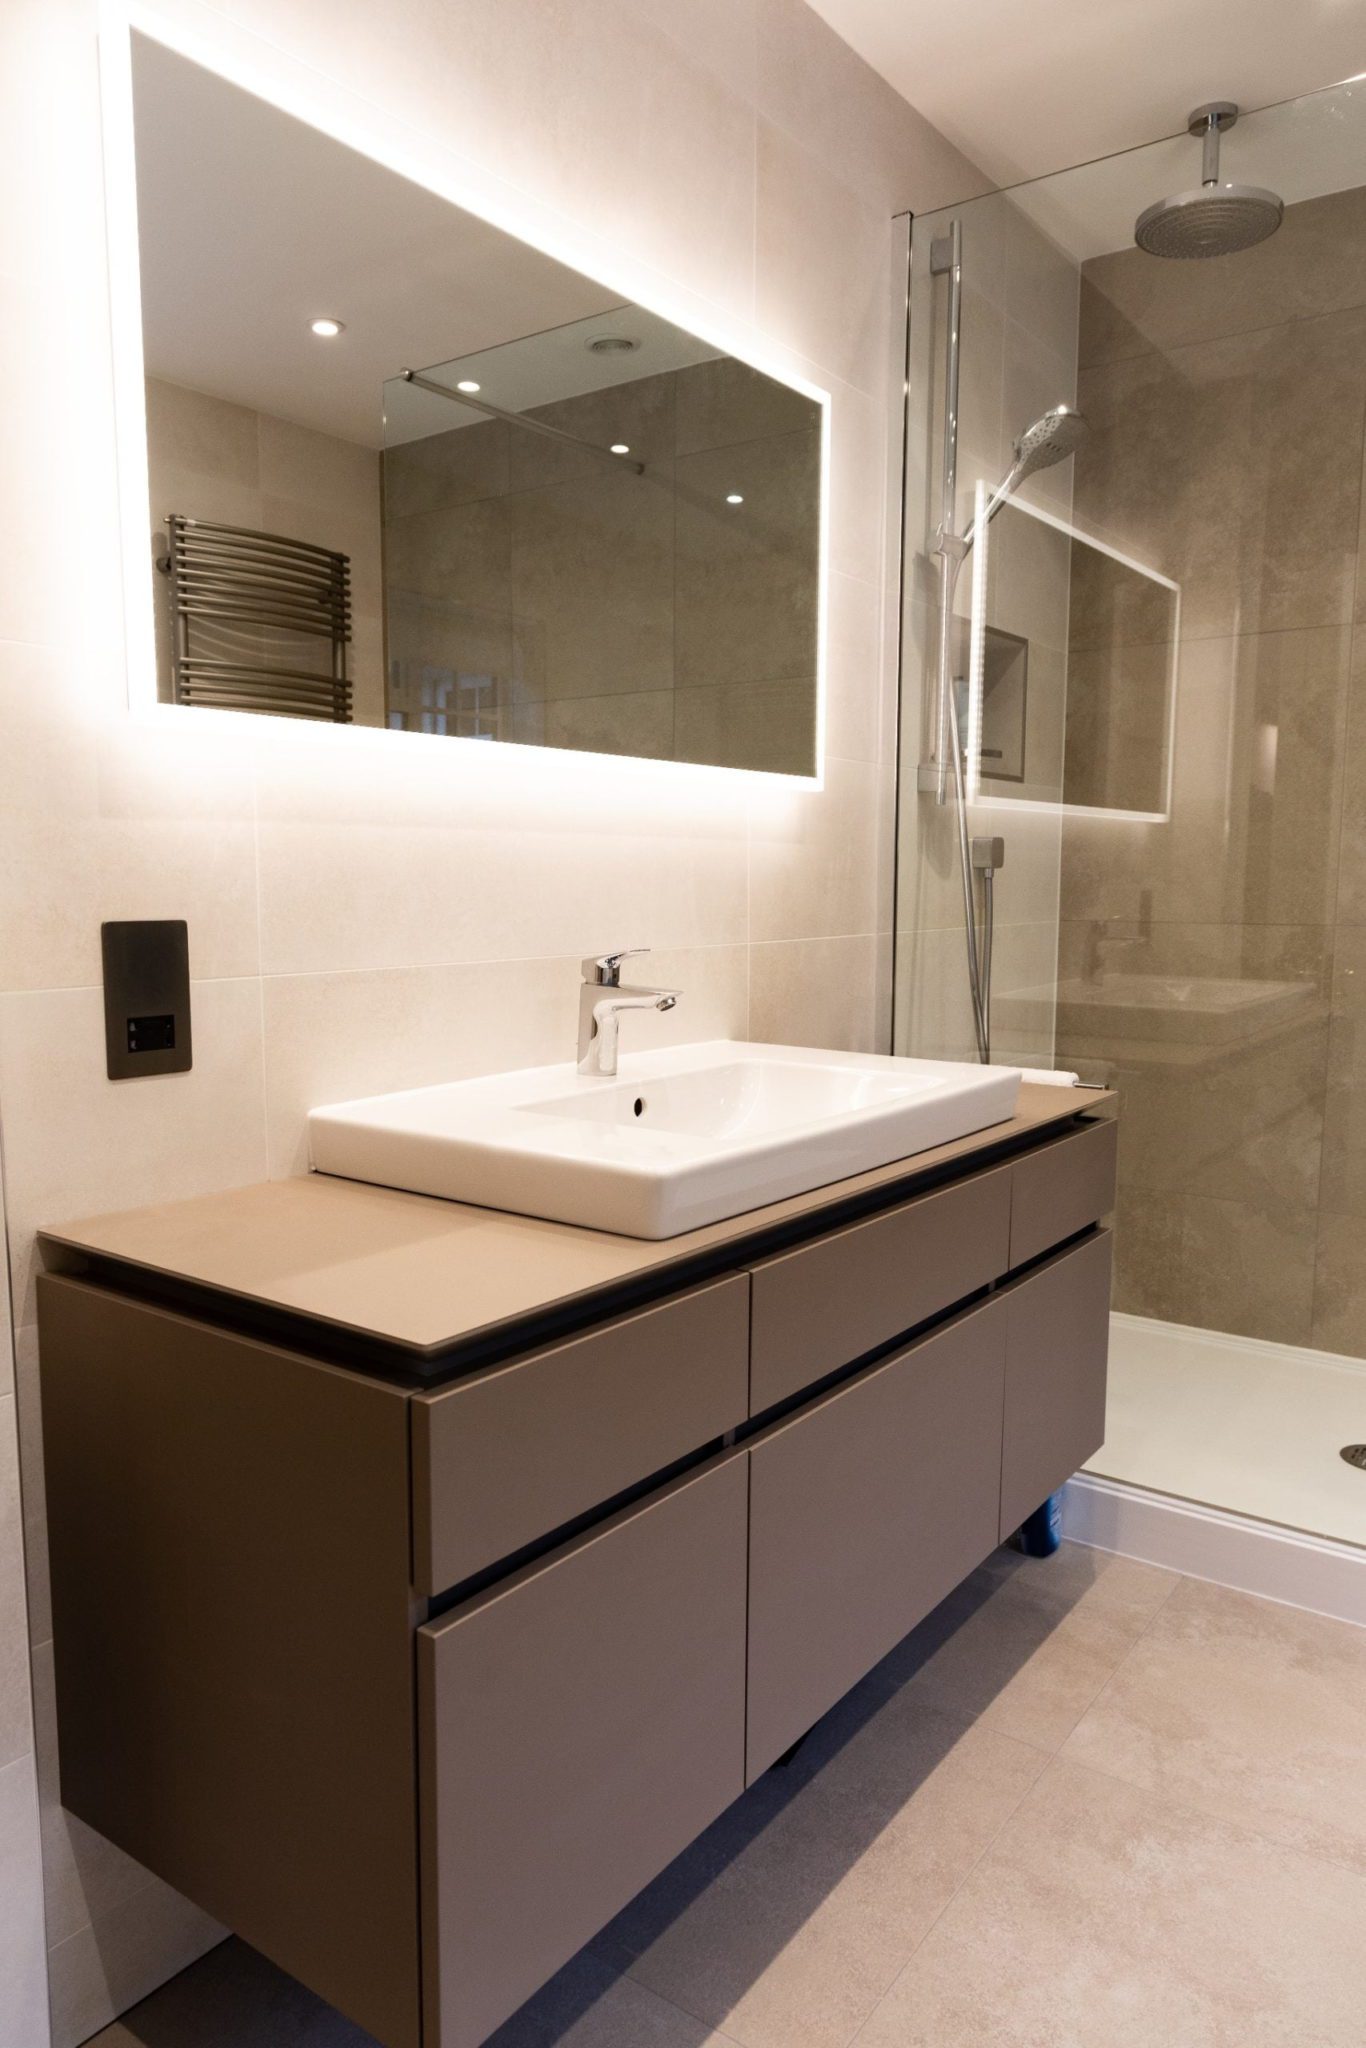 redesign and refurbishment of bathrooms and cloakroom